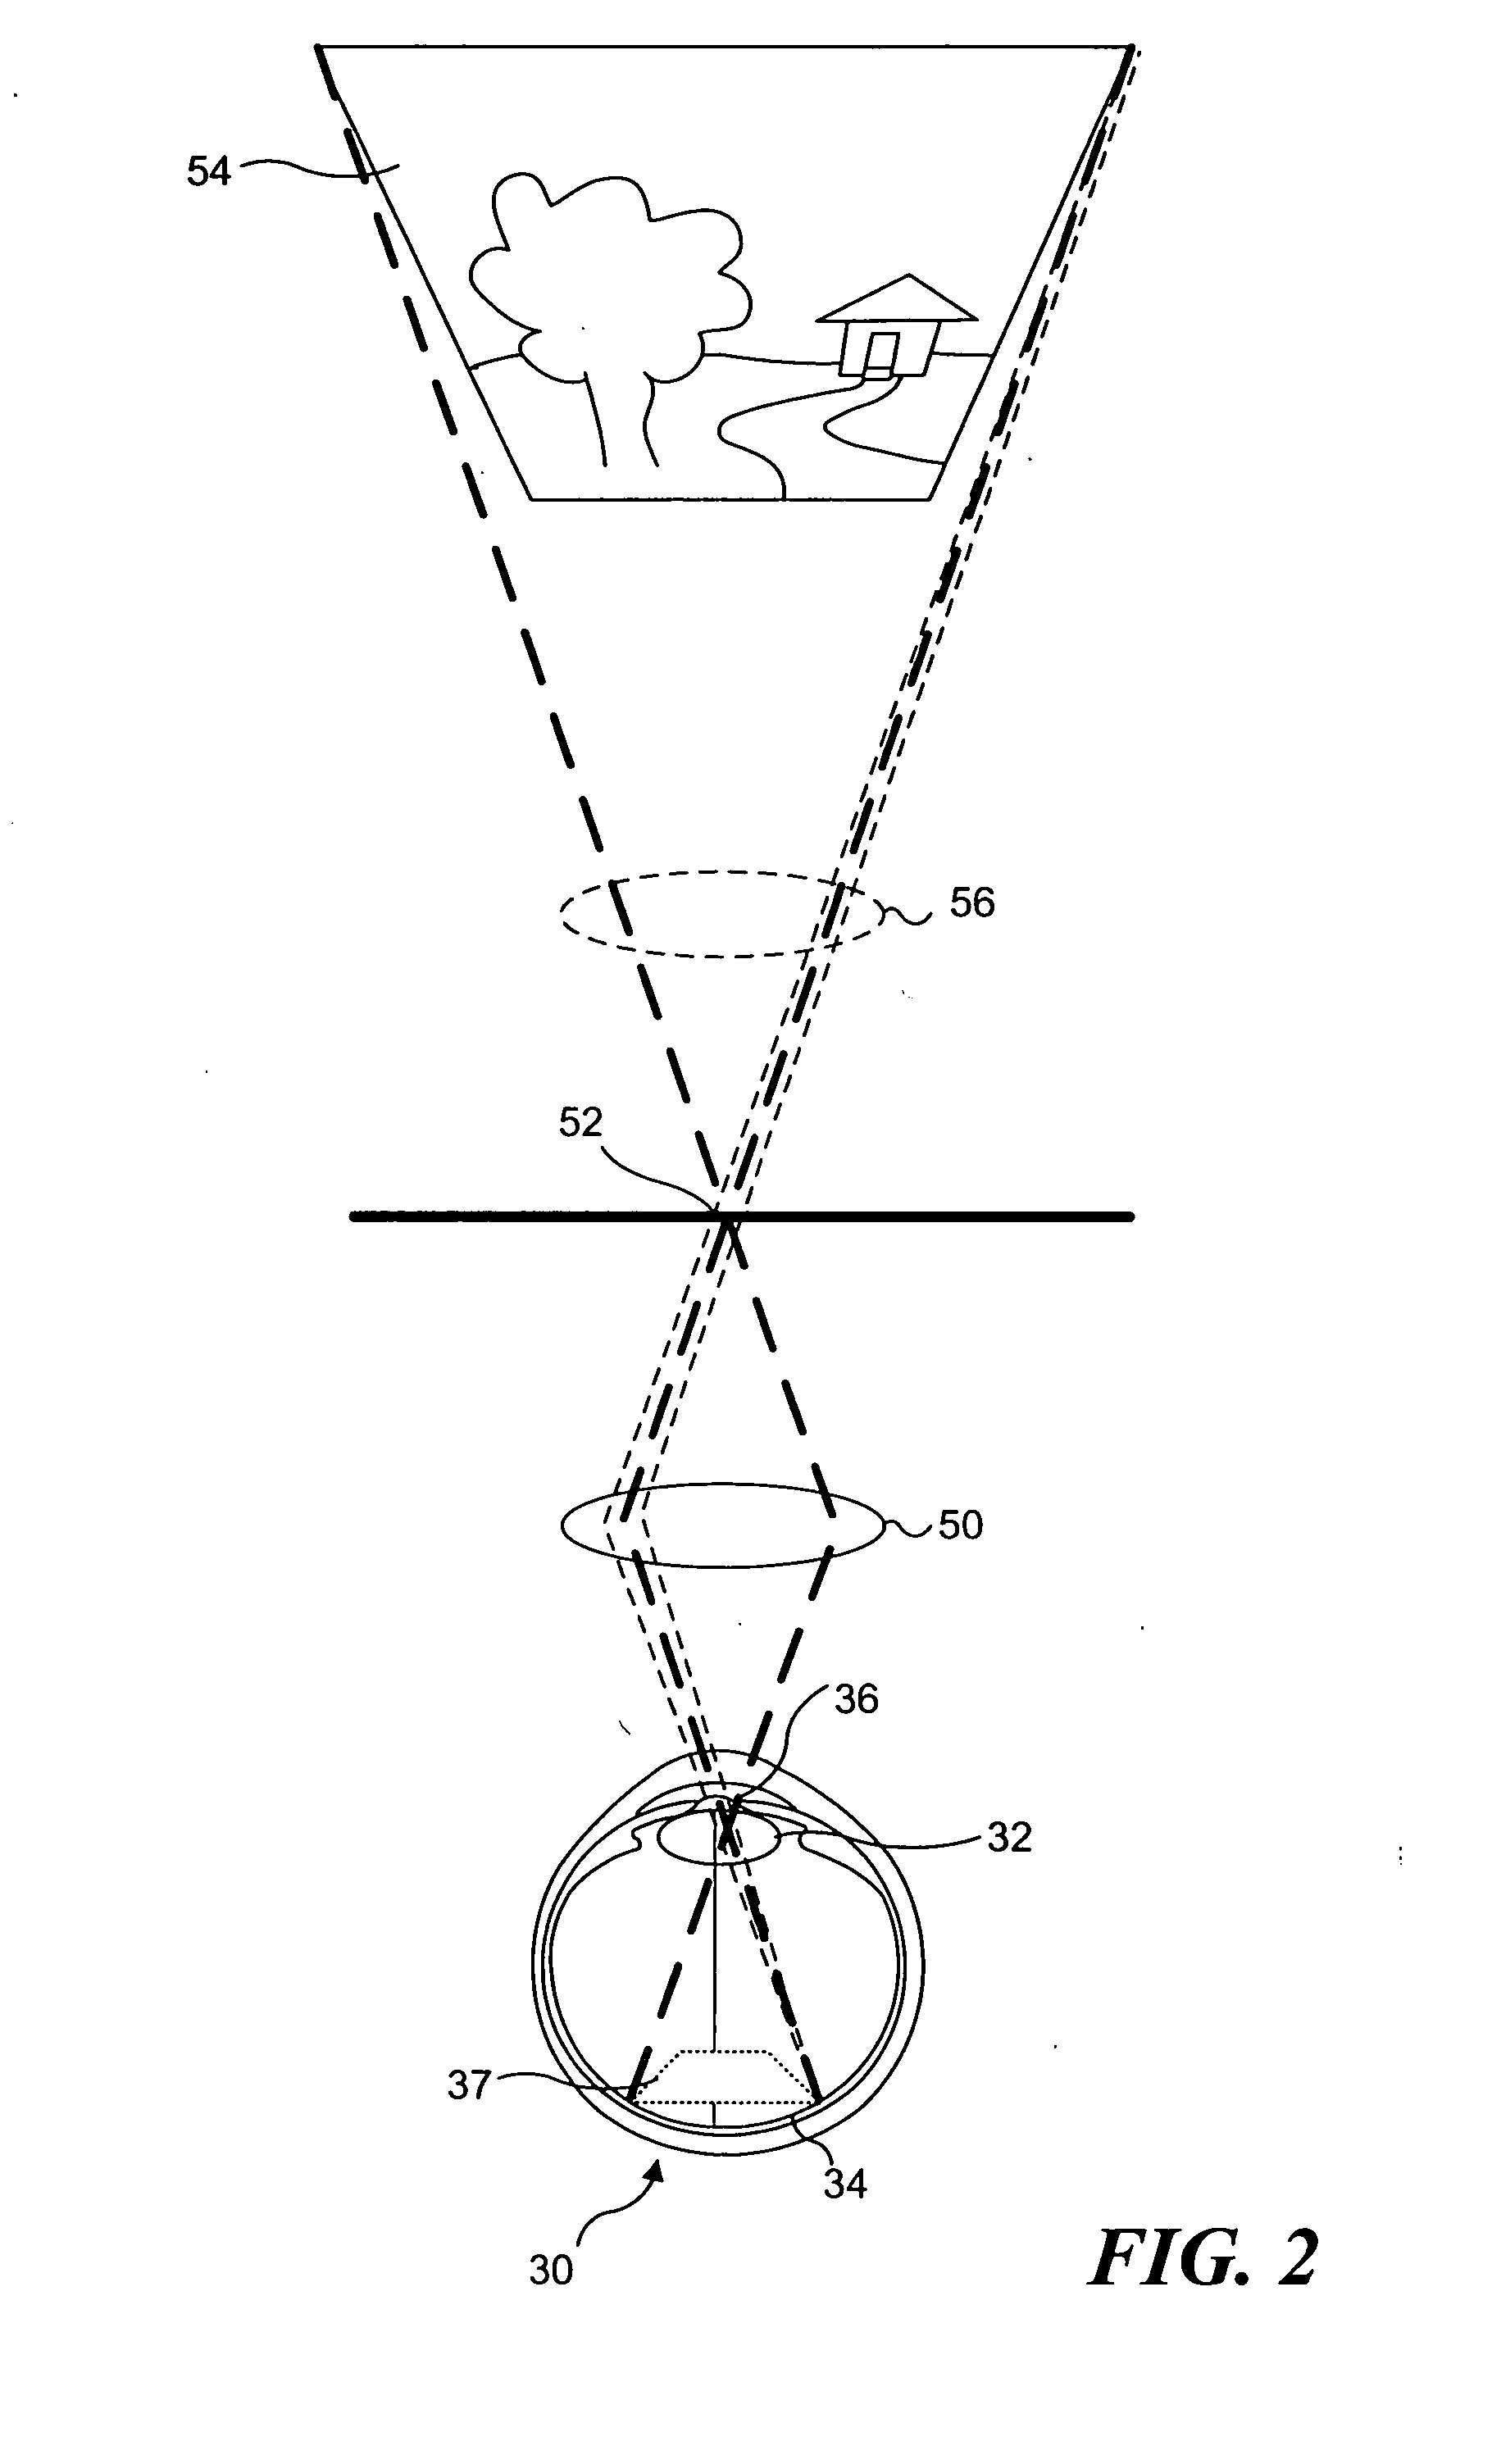 Materials and methods for simulating focal shifts in viewers using large depth of focus displays